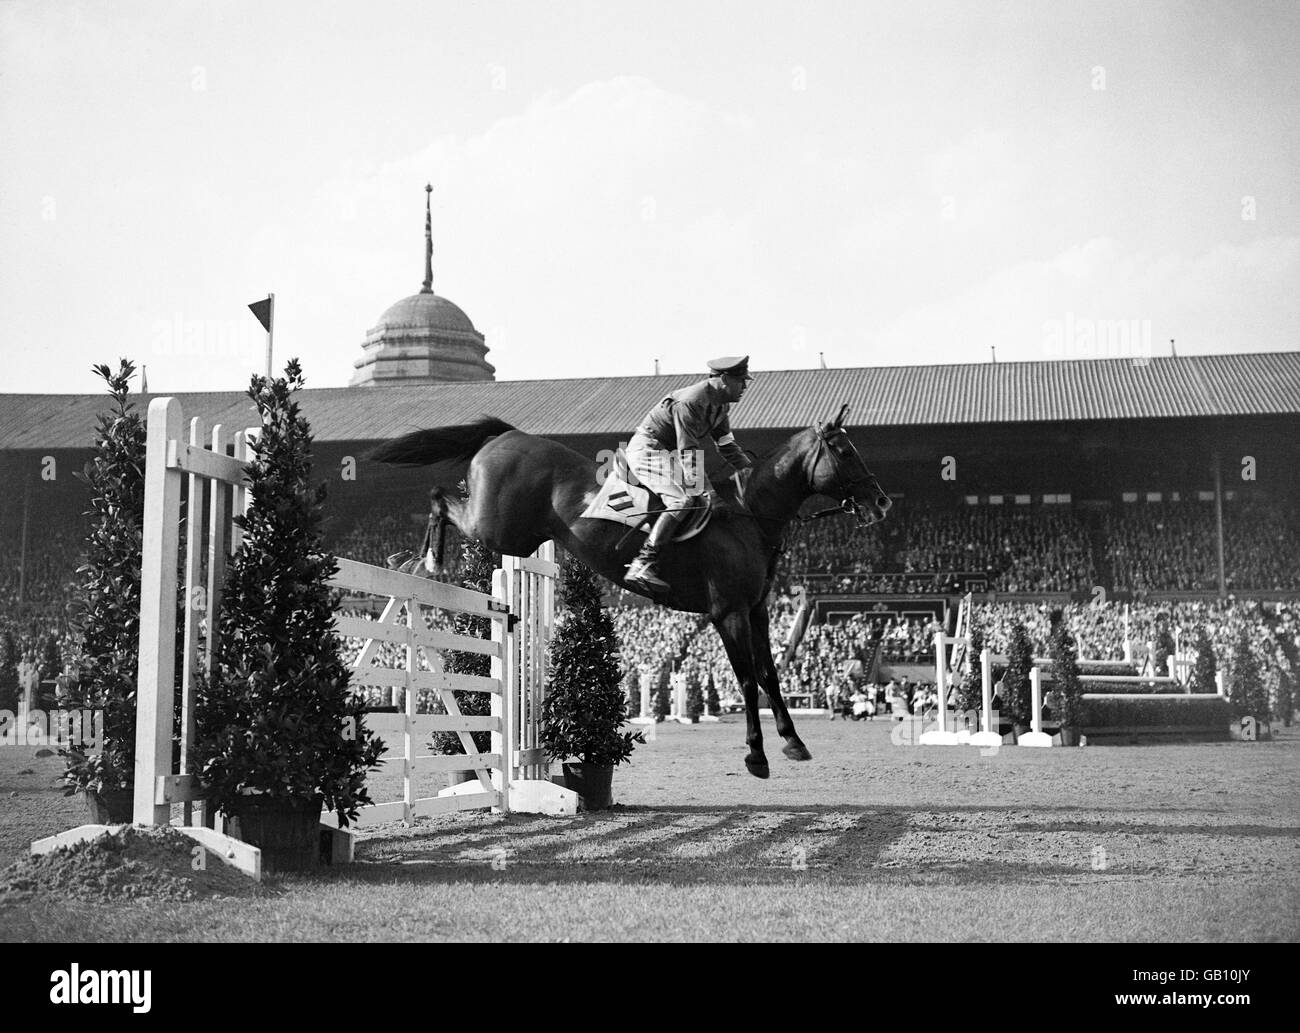 One of the competitors jumping a fence during the Prix Des Nations. Stock Photo